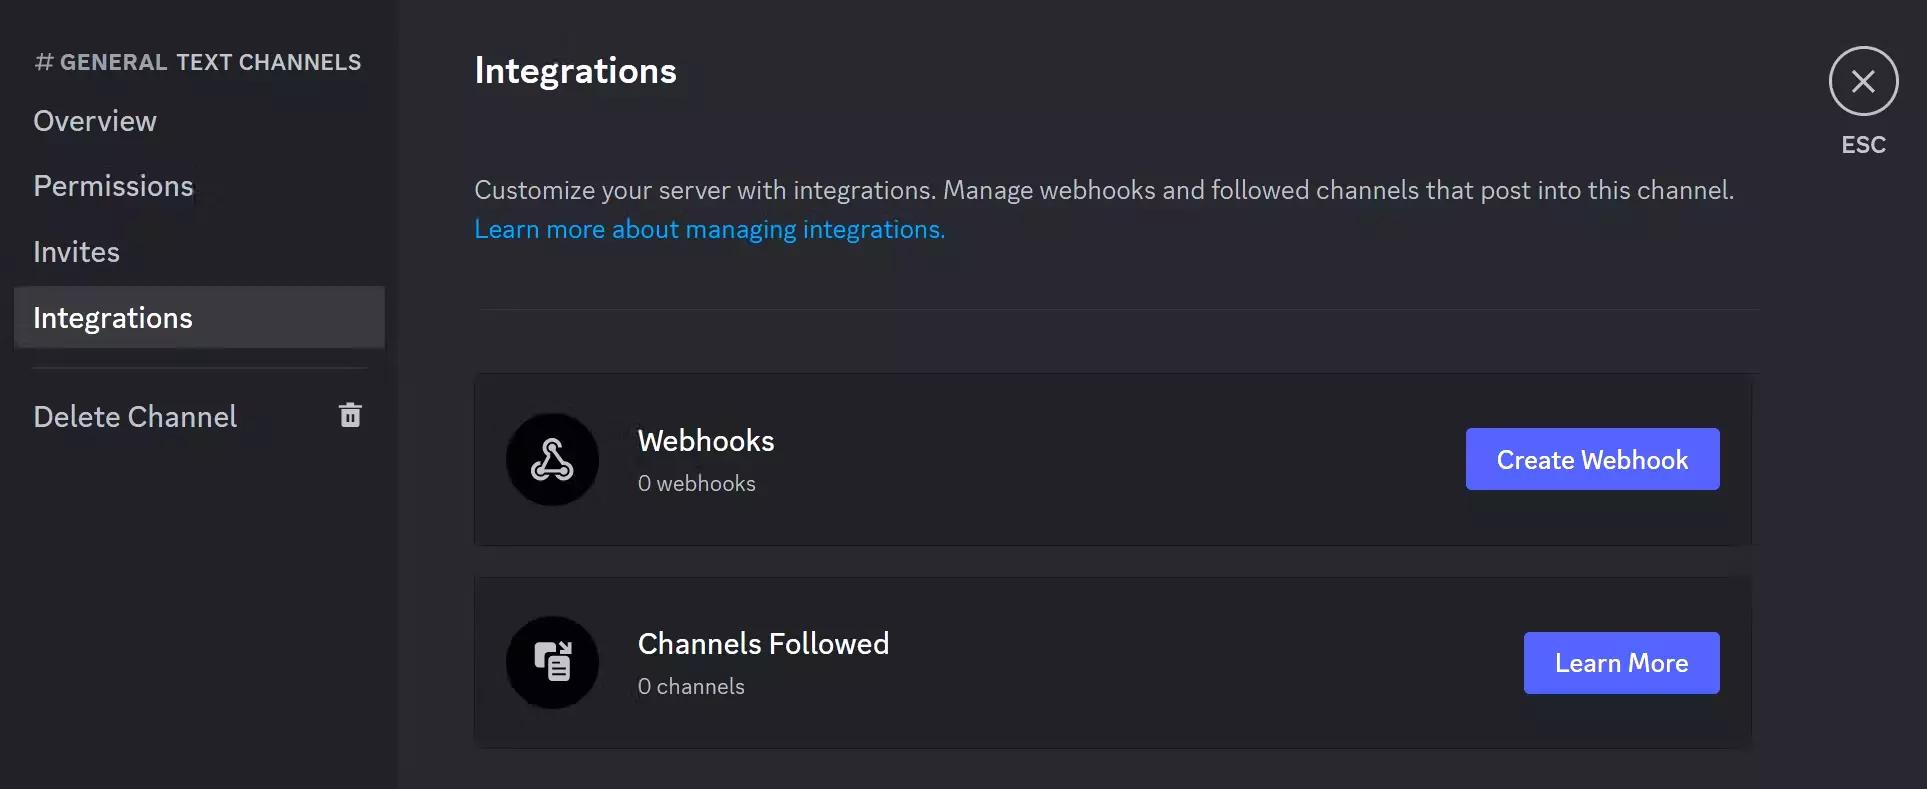 Integrate services with Discord via webhooks.